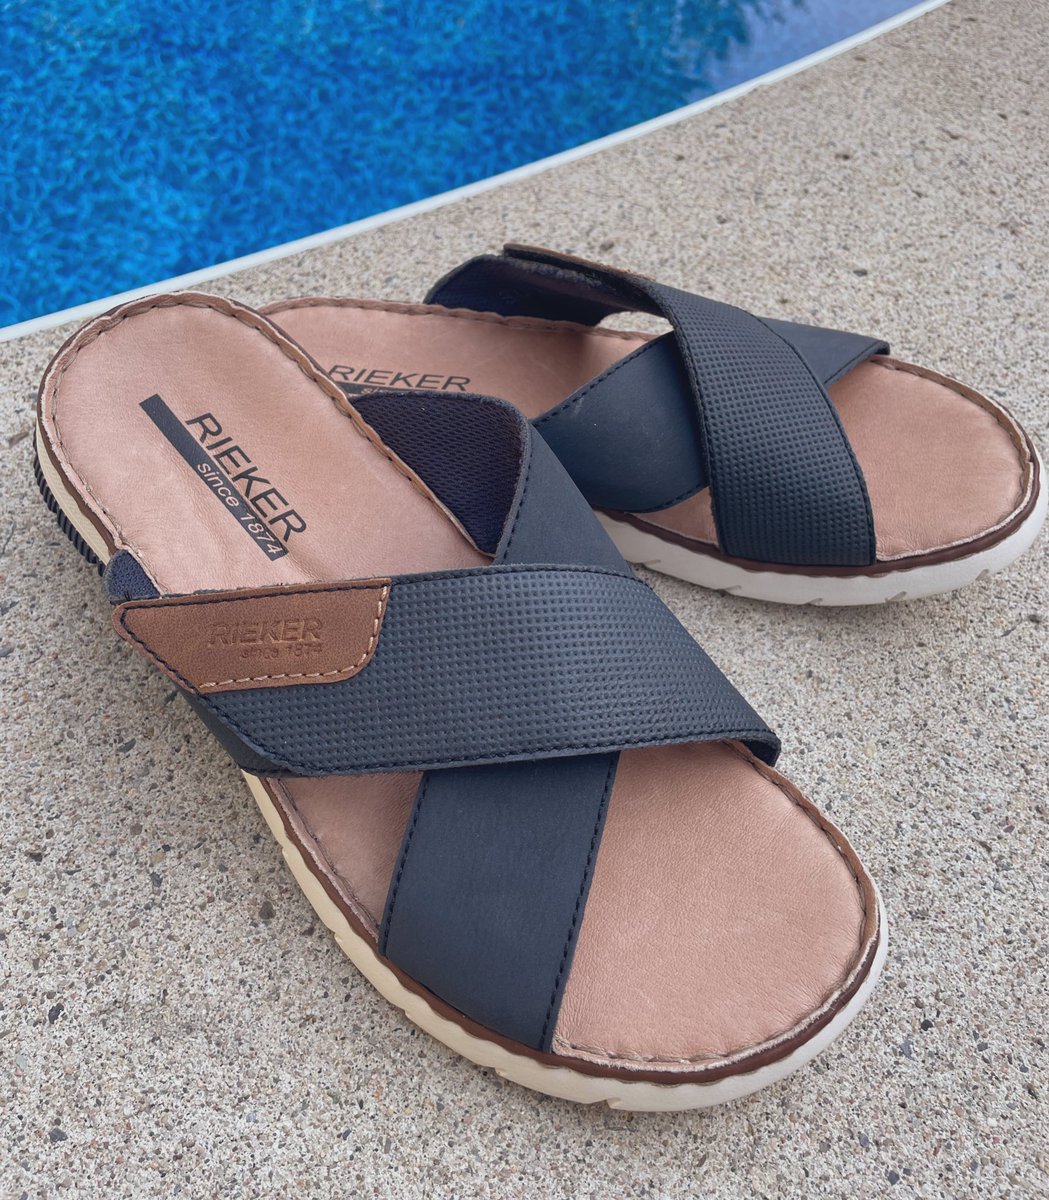 Guys, they would be the best sandals you’d ever wear! Want to win them? Comment your shoe size to get in the draw. If you heart ♥️ and retweet we would love it too! 
#ottawa #sandals #GiveawayTime